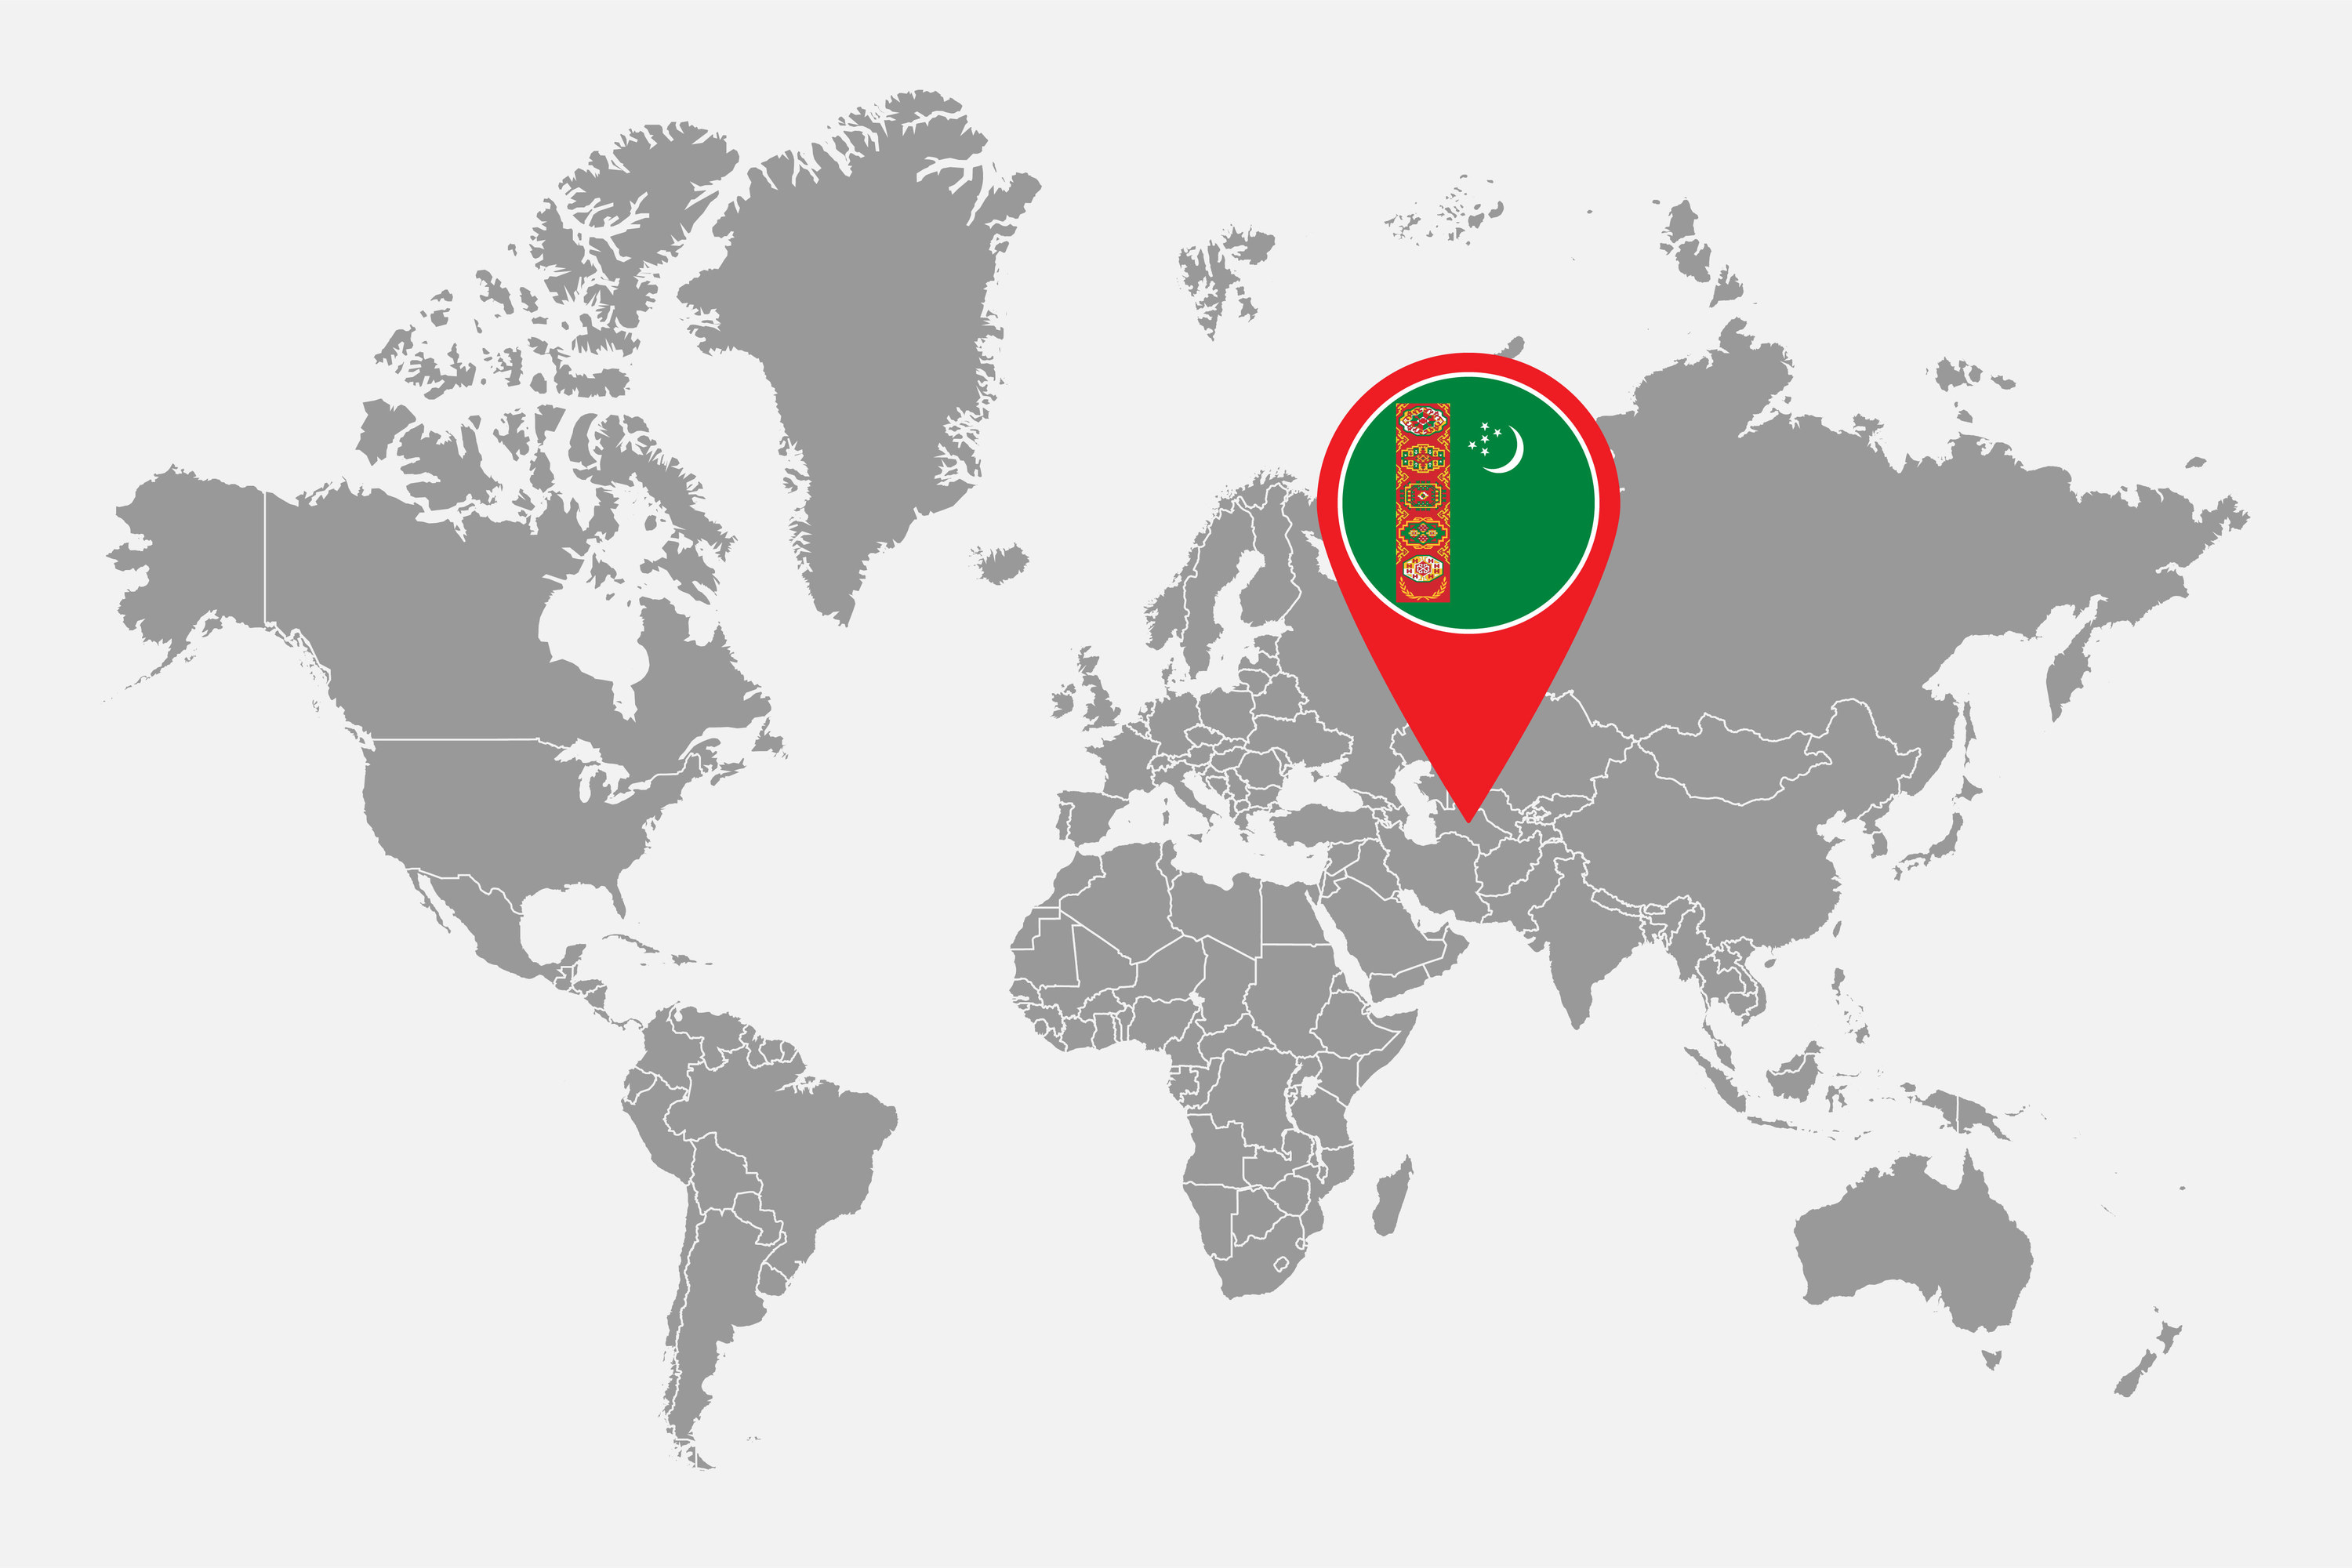 A world map with Turkmenistan indicated